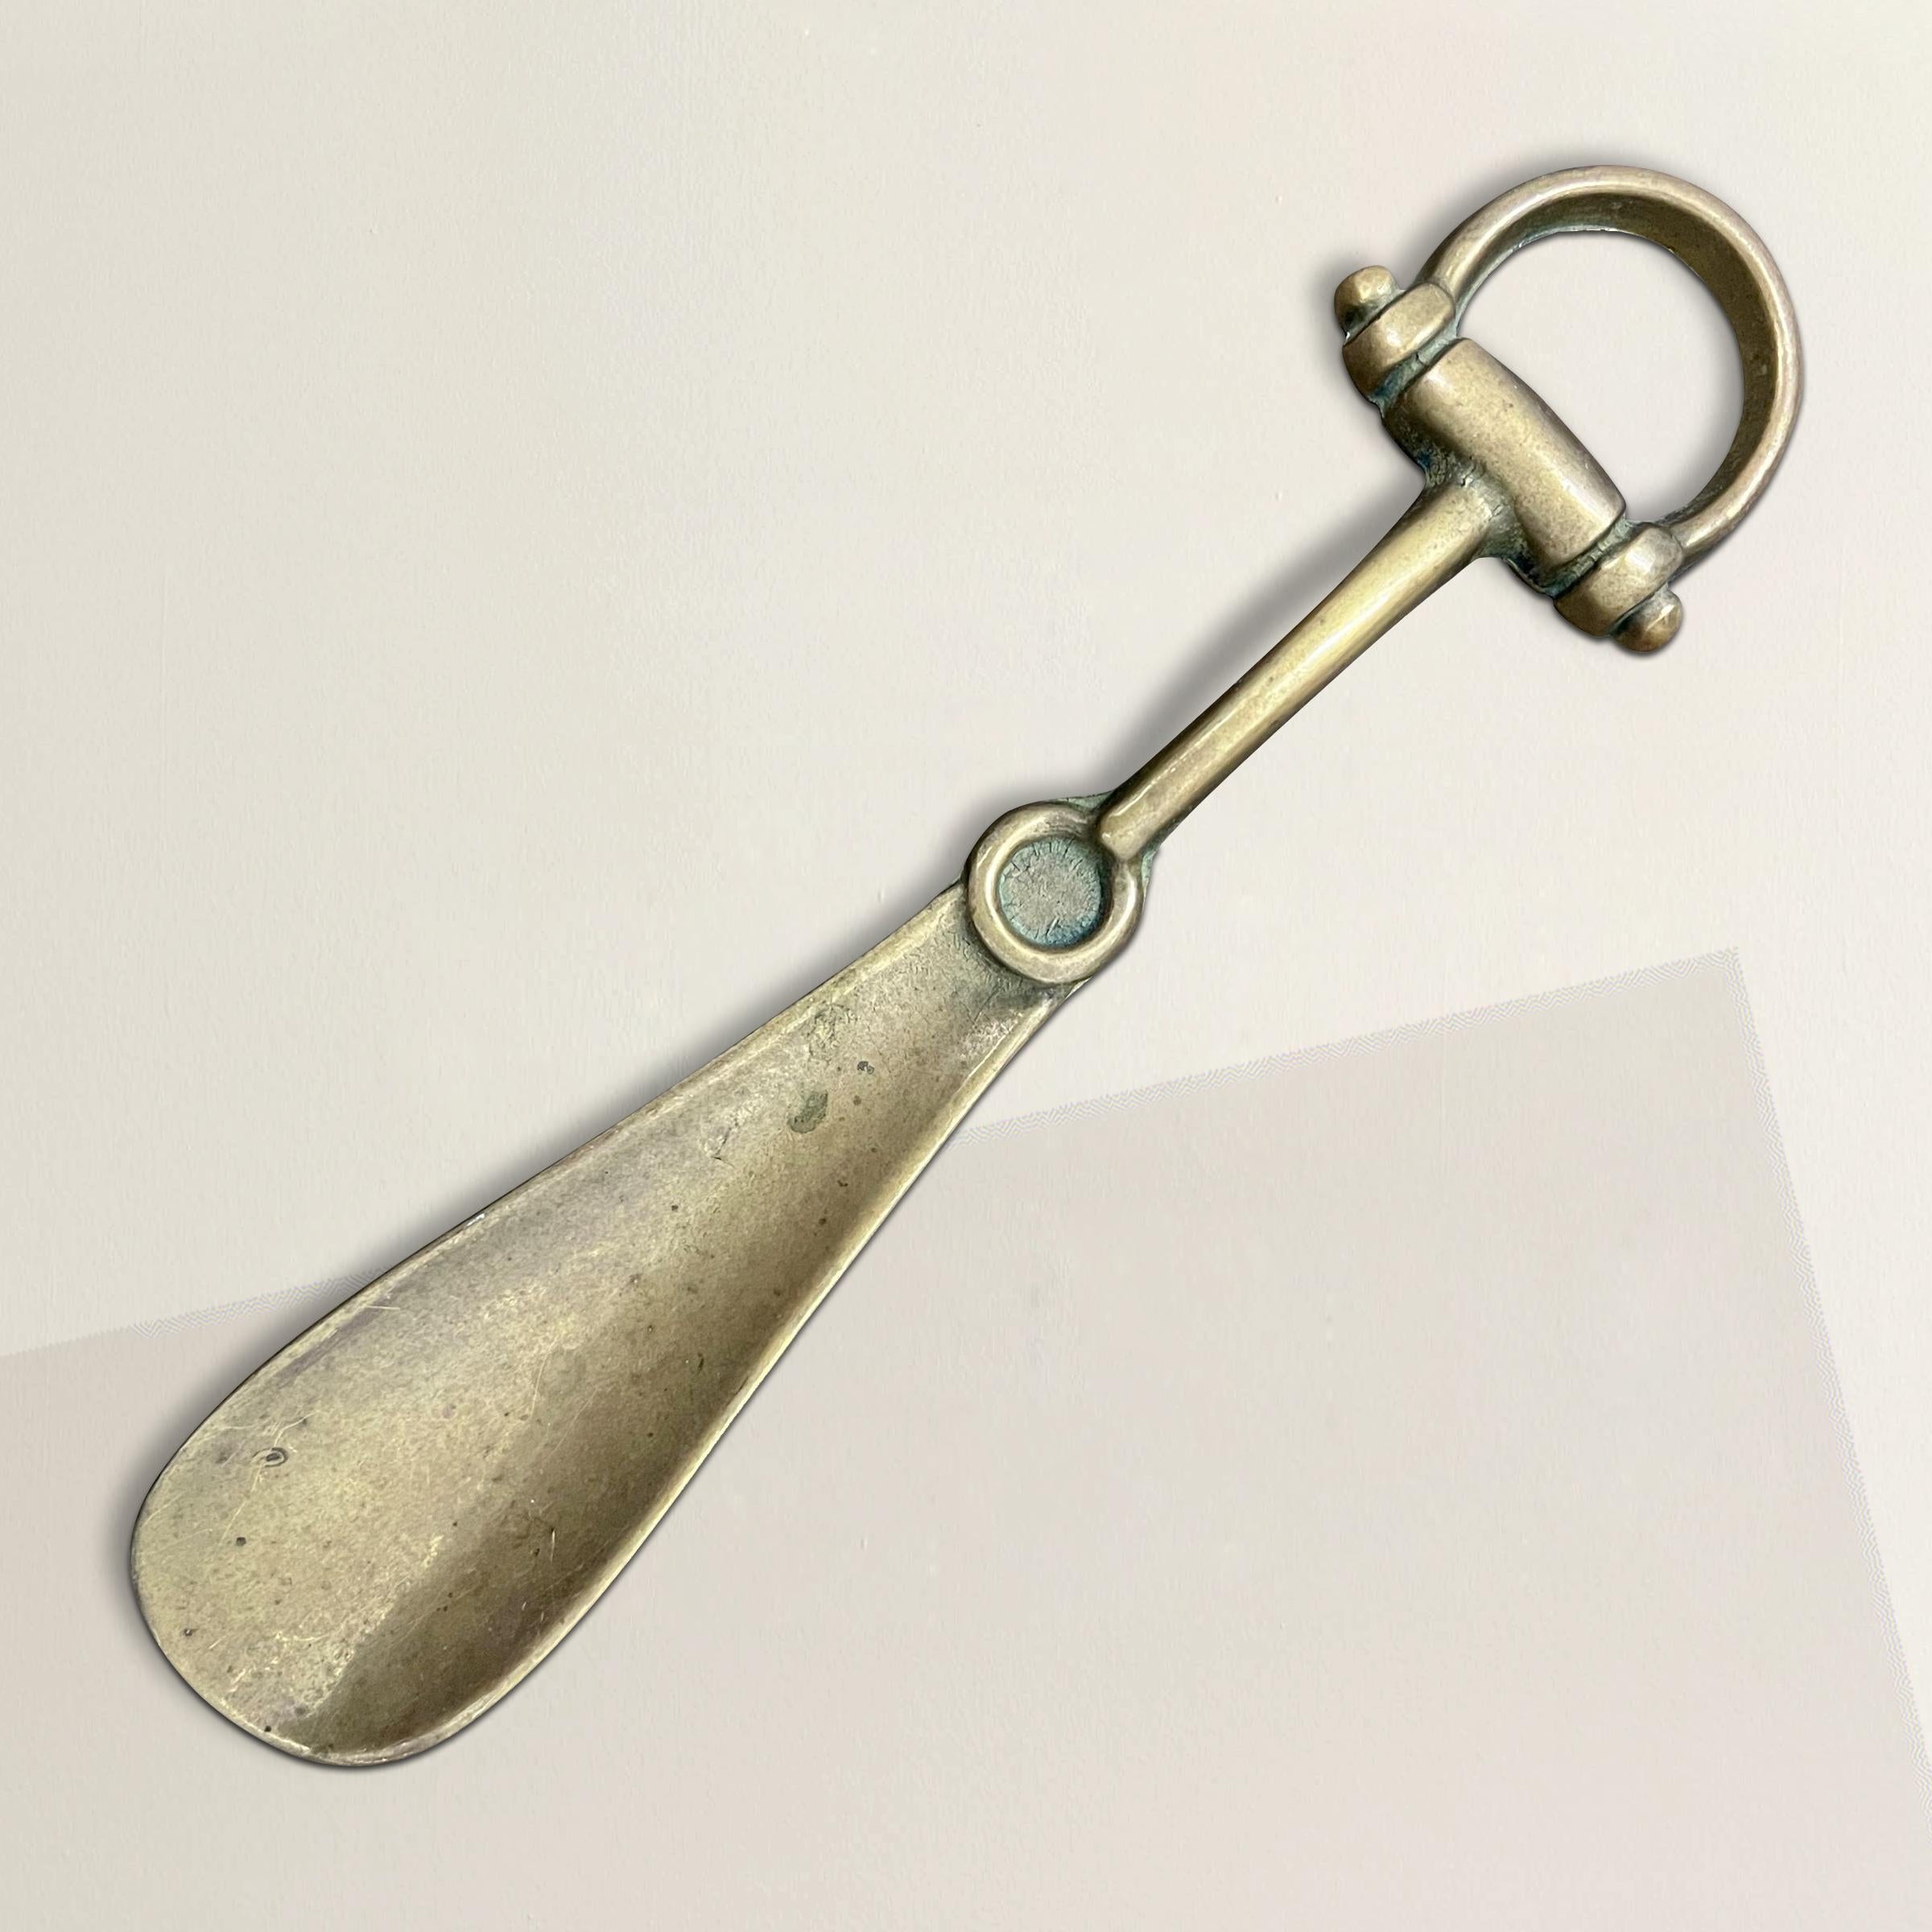 A chic Mid-20th Century Italian bronze horsebit shoehorn by Gucci. Purchased in Florence, Italy from a vintage fashion dealer who said this was borrowed by the Gucci Museo for an exhibition showcasing the company's housewares.